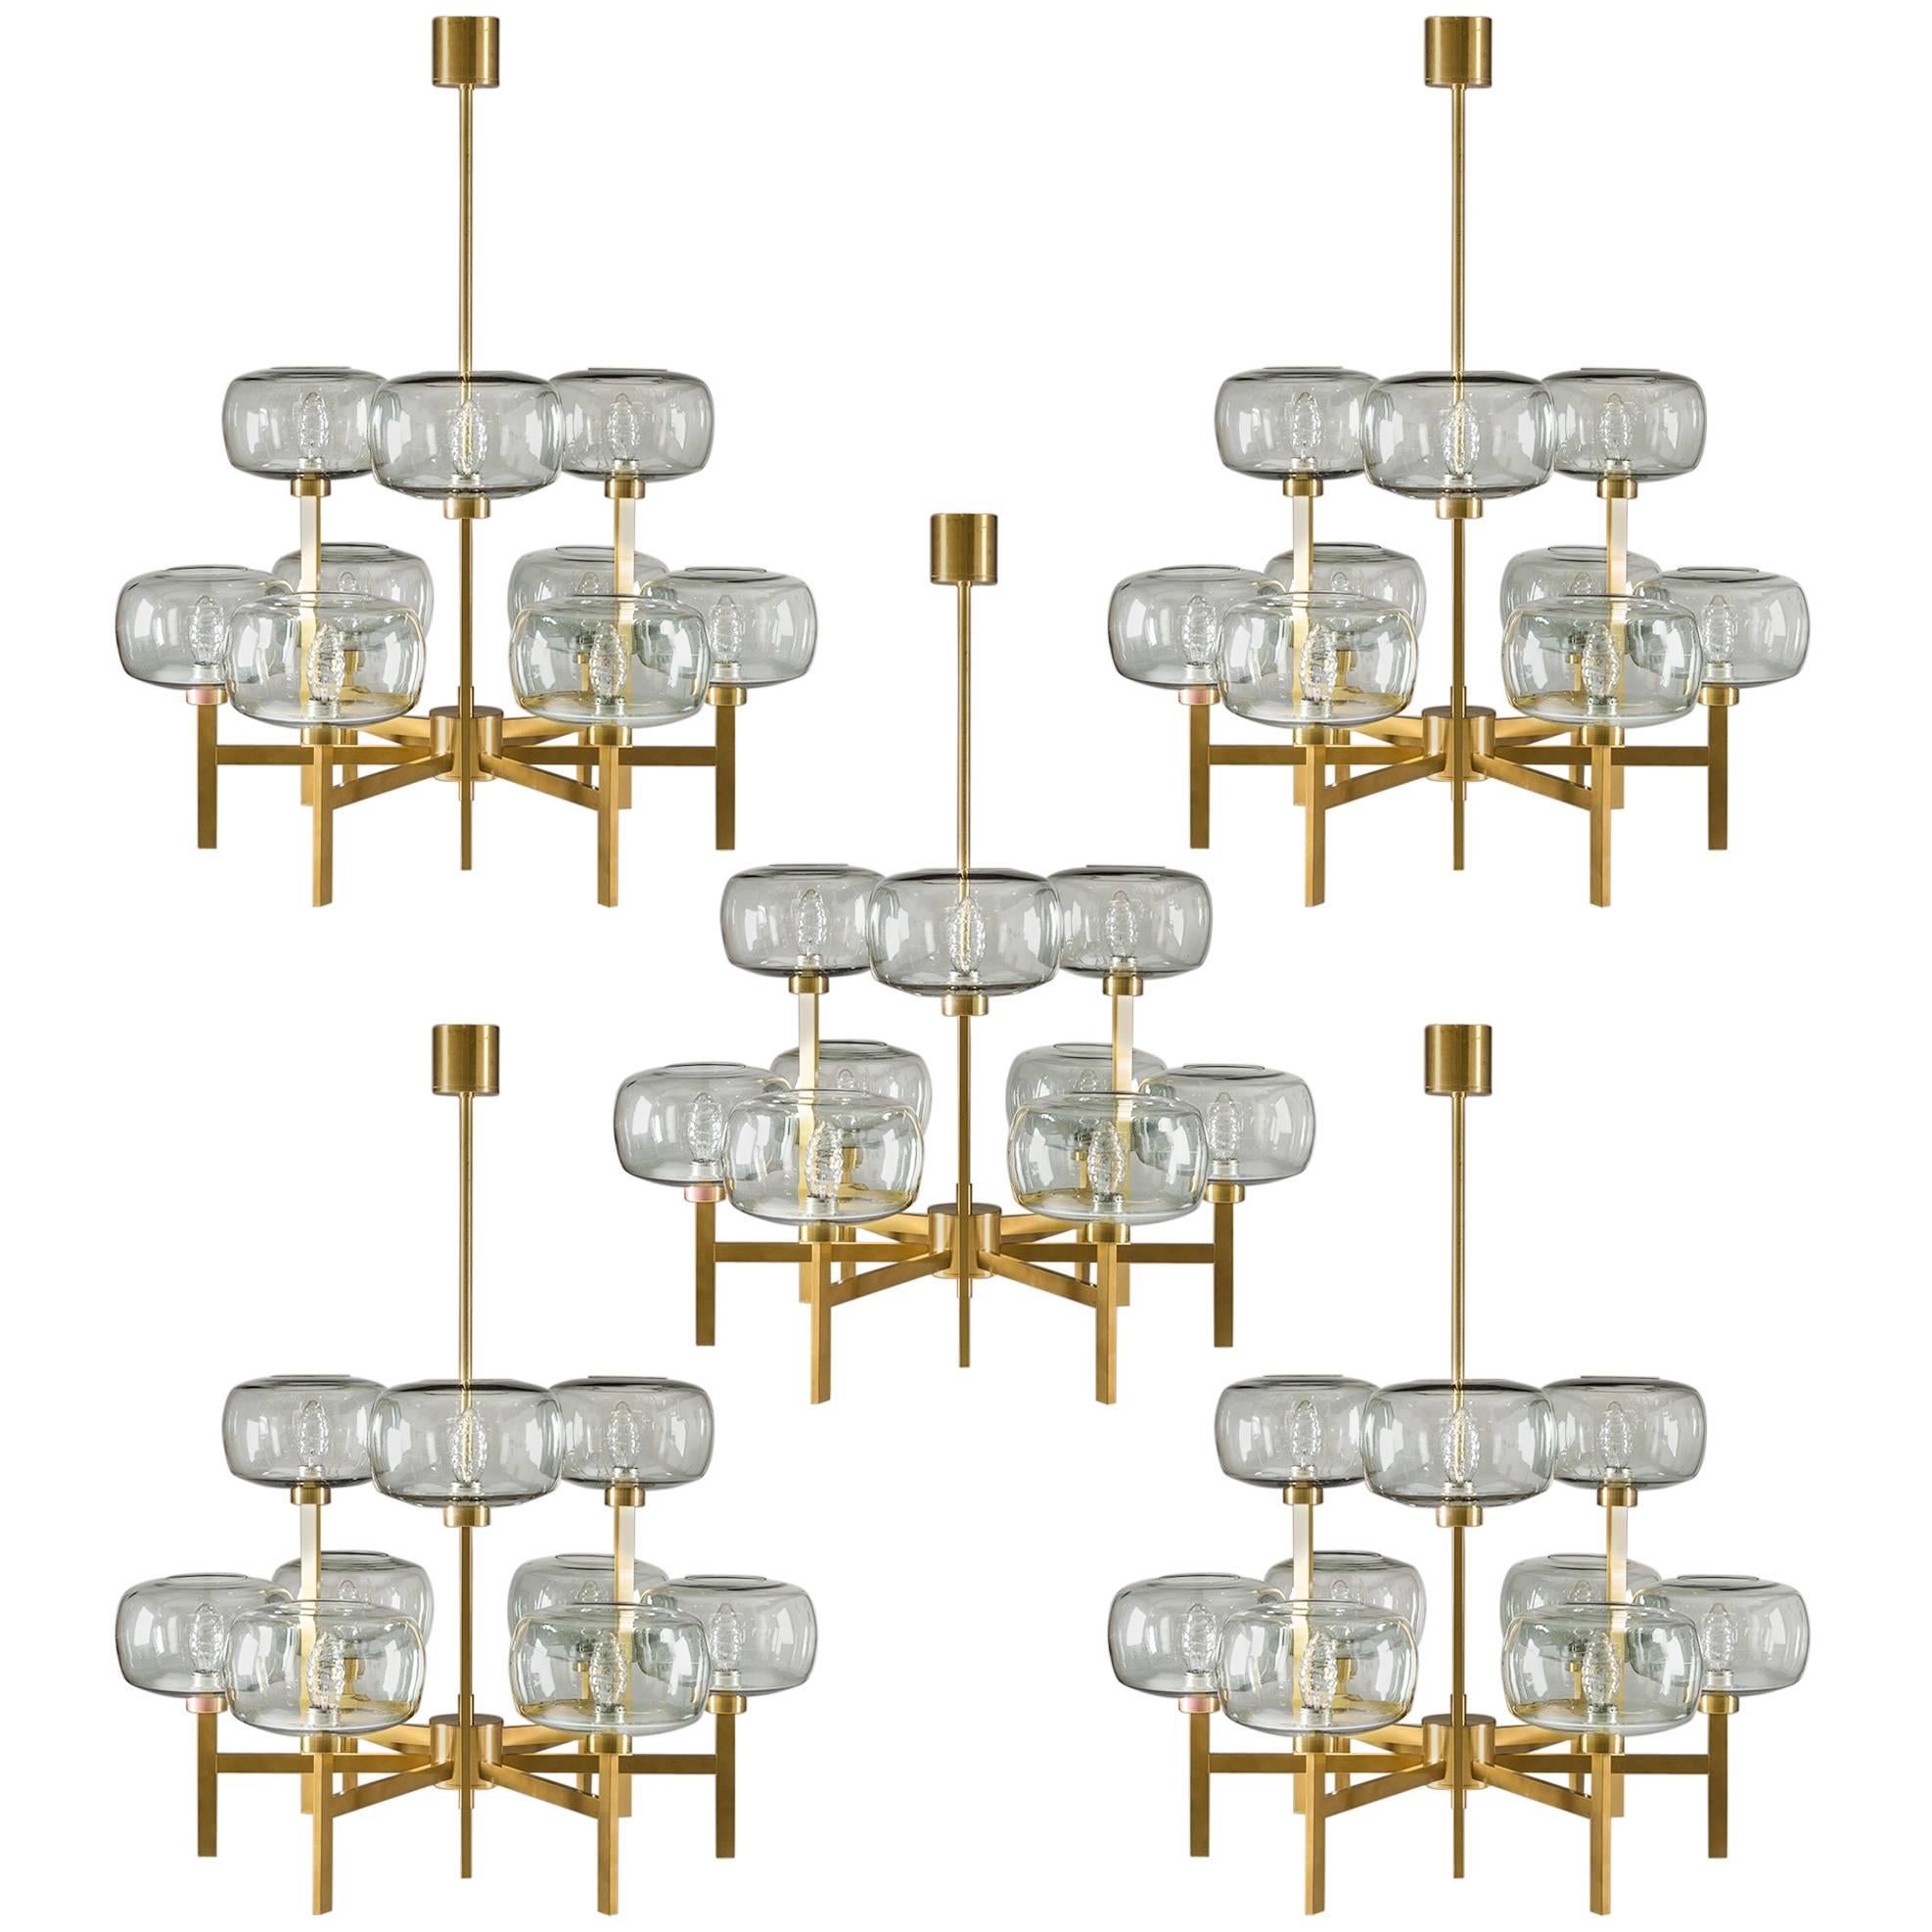 Five Swedish Chandeliers in Brass and Glass by Holger Johansson